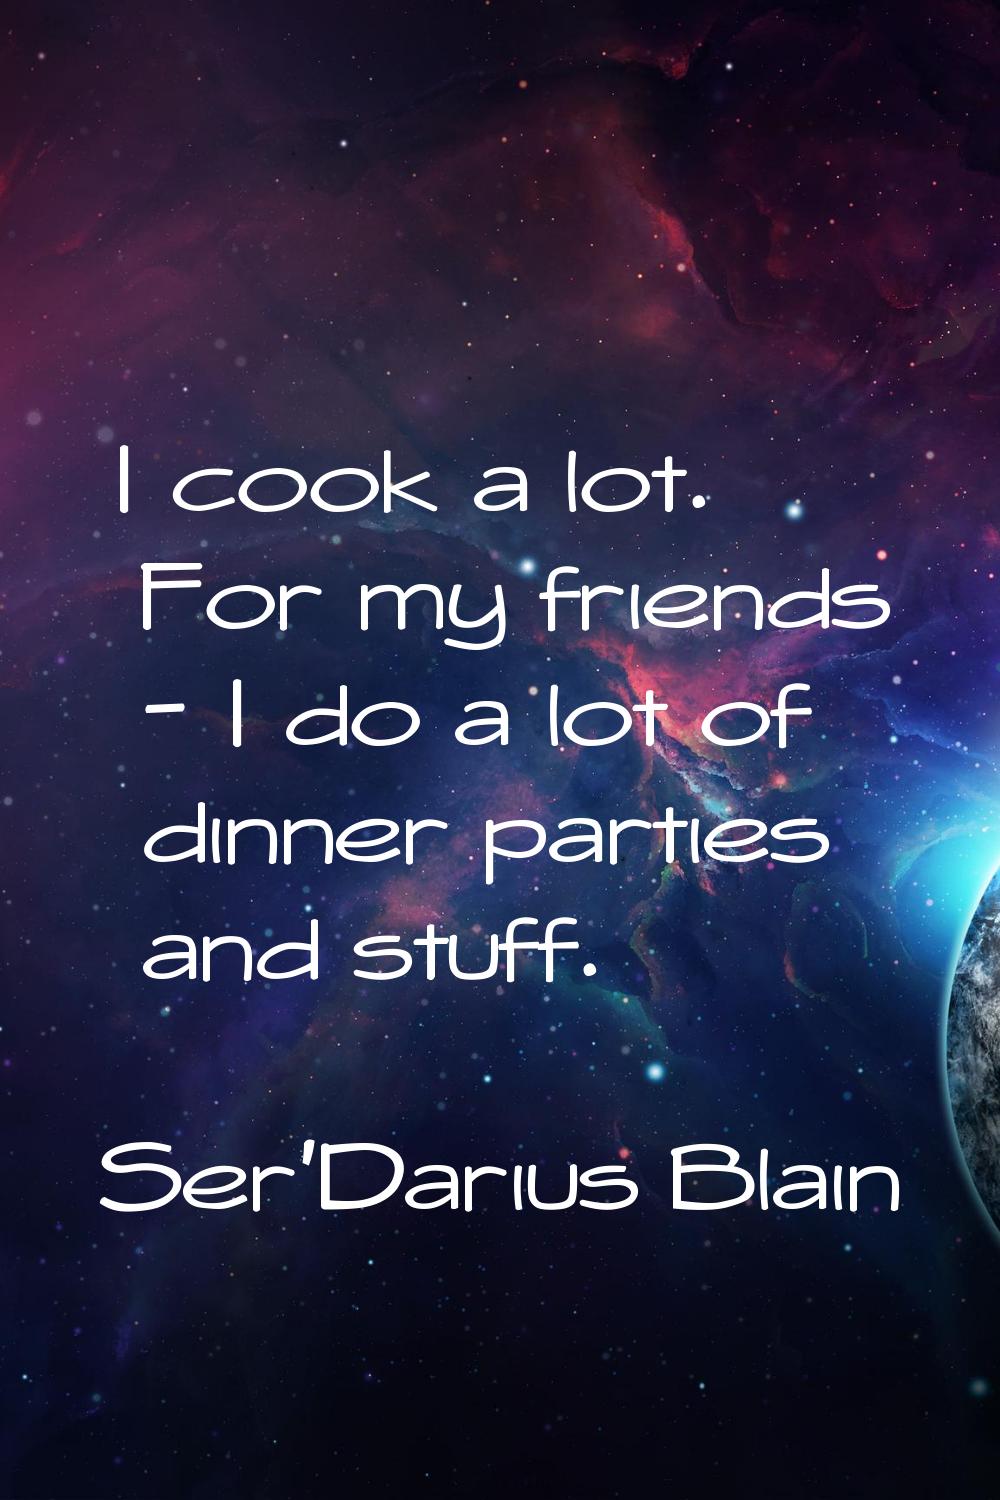 I cook a lot. For my friends - I do a lot of dinner parties and stuff.